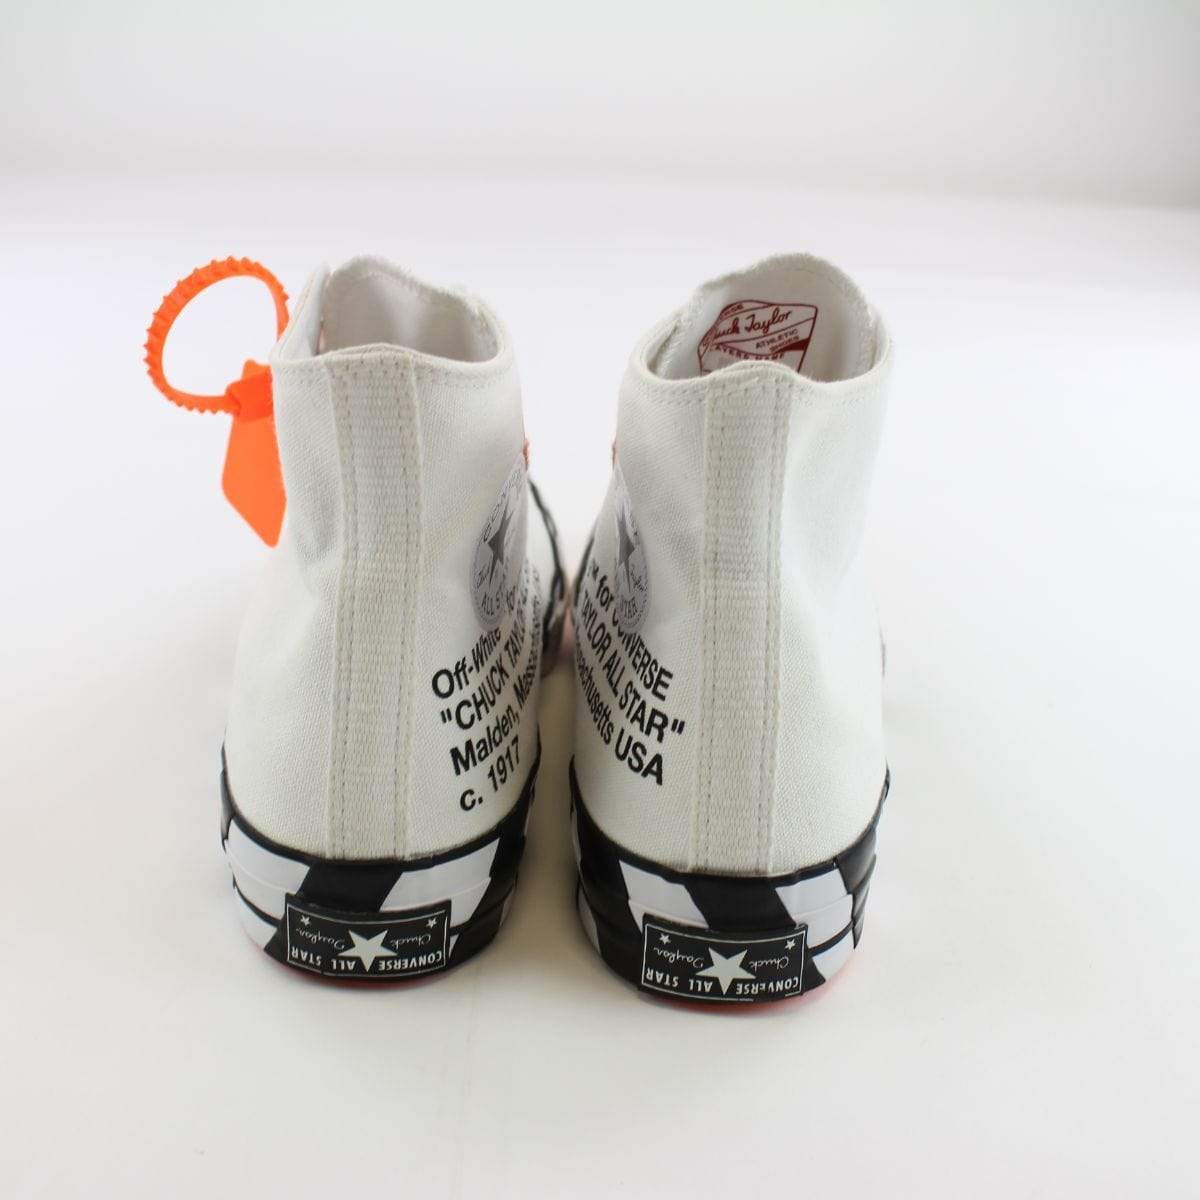 Converse x Off white Chuck Taylor White - SaruGeneral